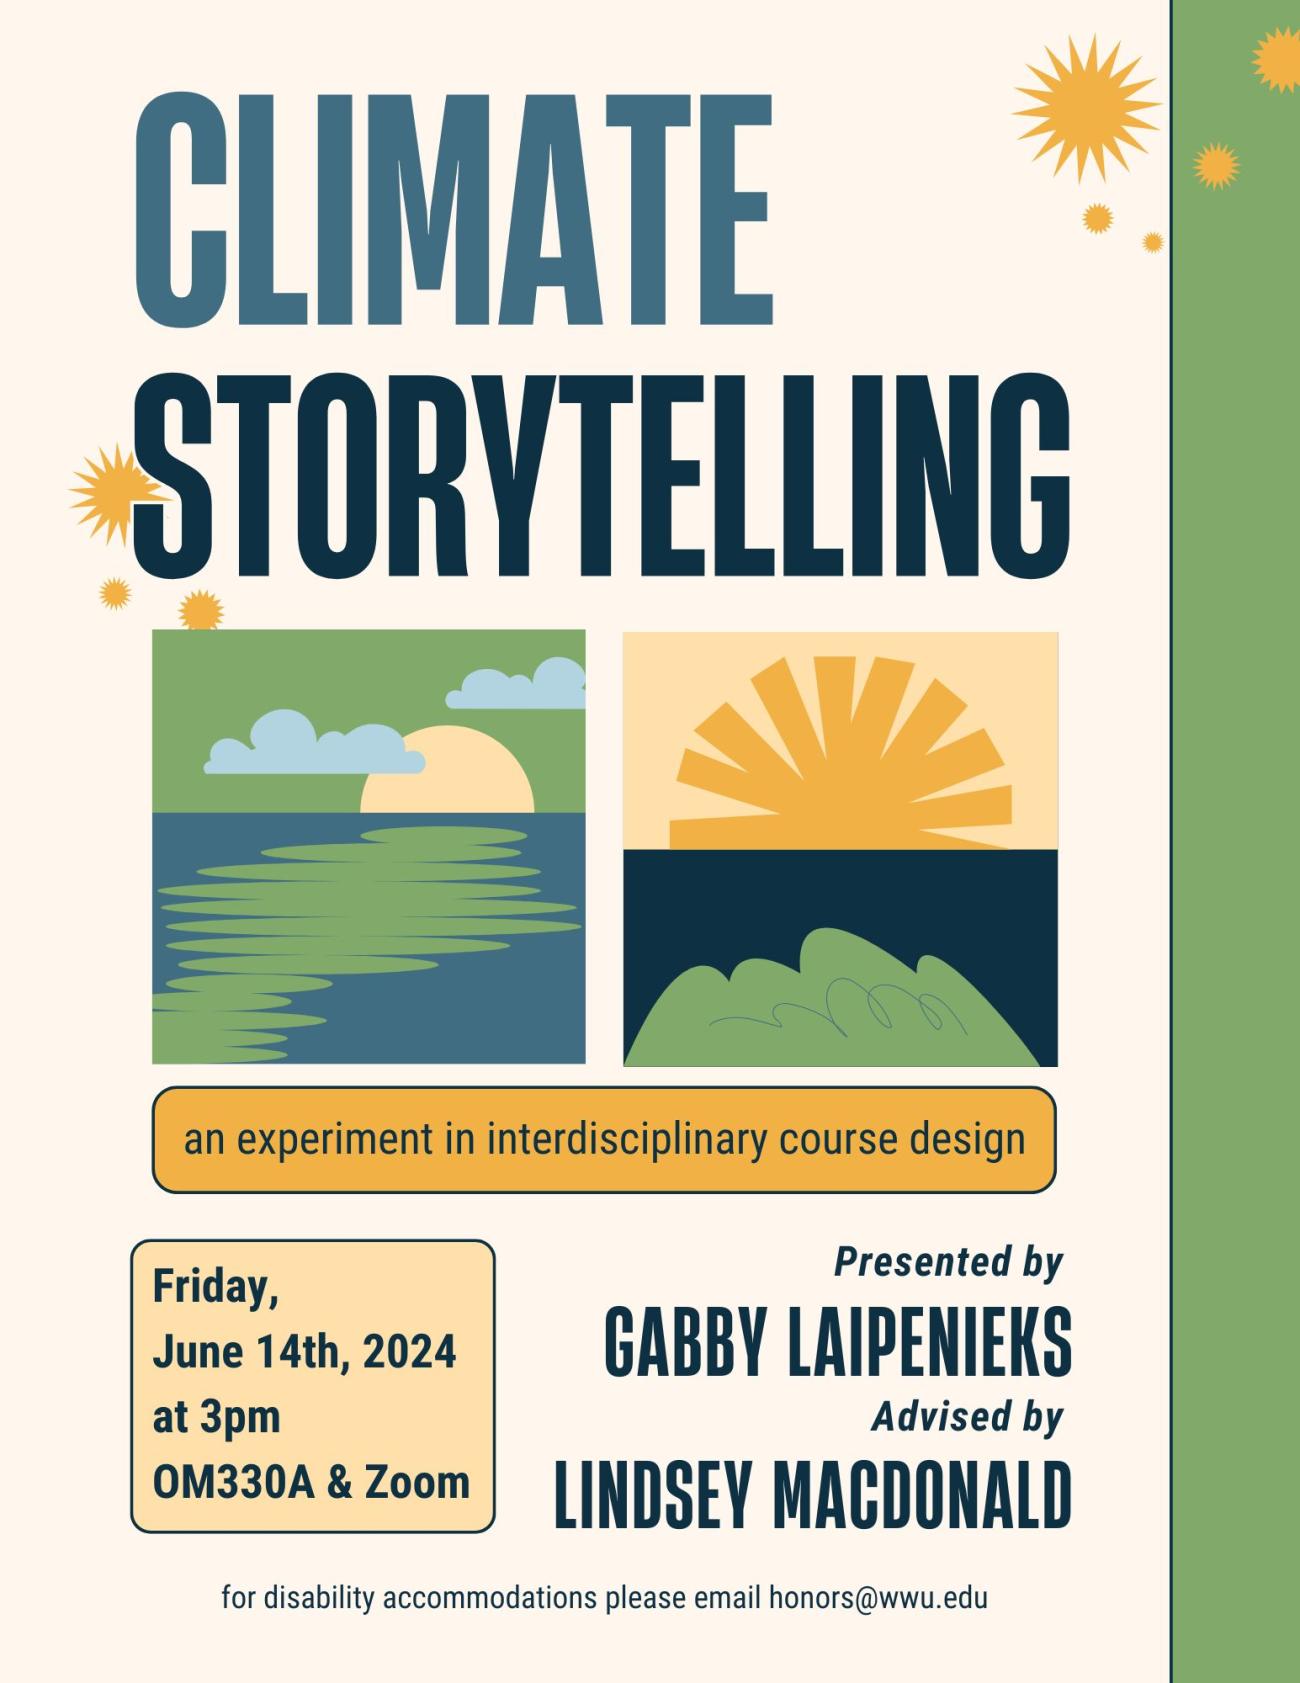 Yellow background with bright yellow suns in the top corners and two yellow, green, and blue graphics of ocean and forest landscapes. Text reads "Climate Storytelling: An experiment in interdisciplinary course design. Presented by Gabby Laipenieks, advised by Lindsey MacDonald. Friday, June 14th, 2024, at 3pm, OM330A and Zoom. For disability accommodations please email honors@wwu.edu".